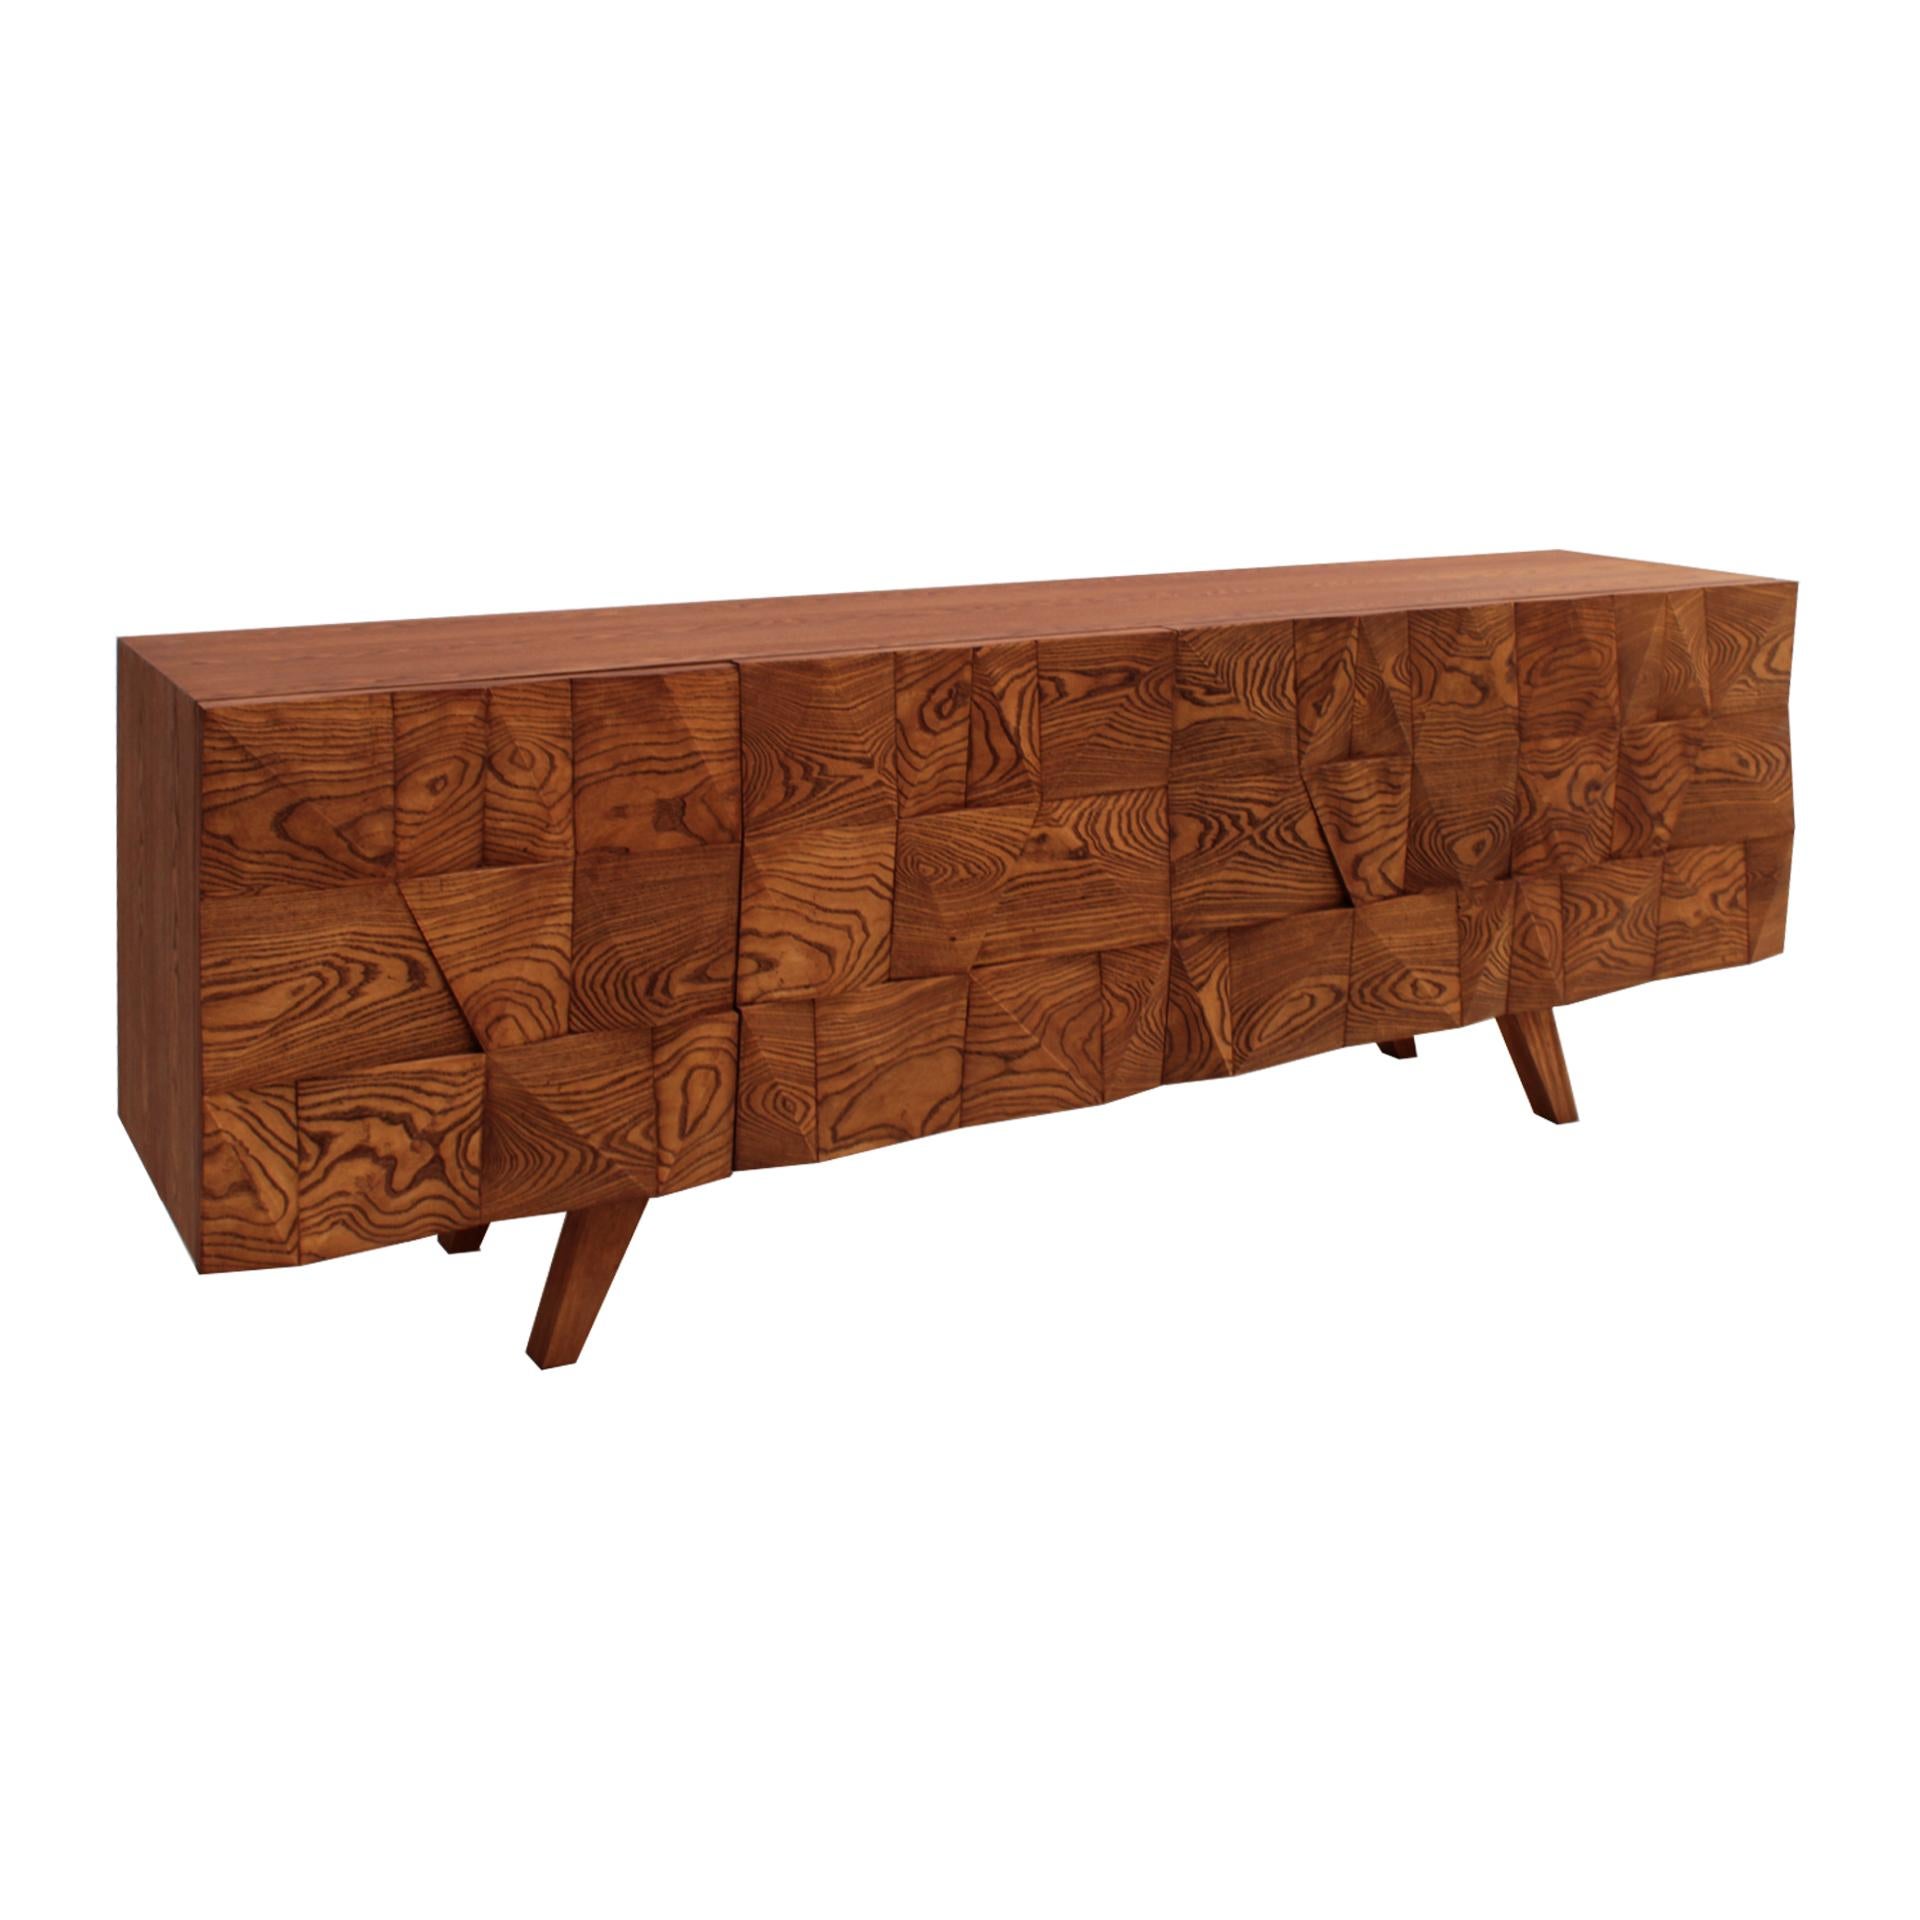 Mid-Century Modern Style Solid Wood Italian Sideboard Designed by L.A. Studio In Good Condition For Sale In Ibiza, Spain